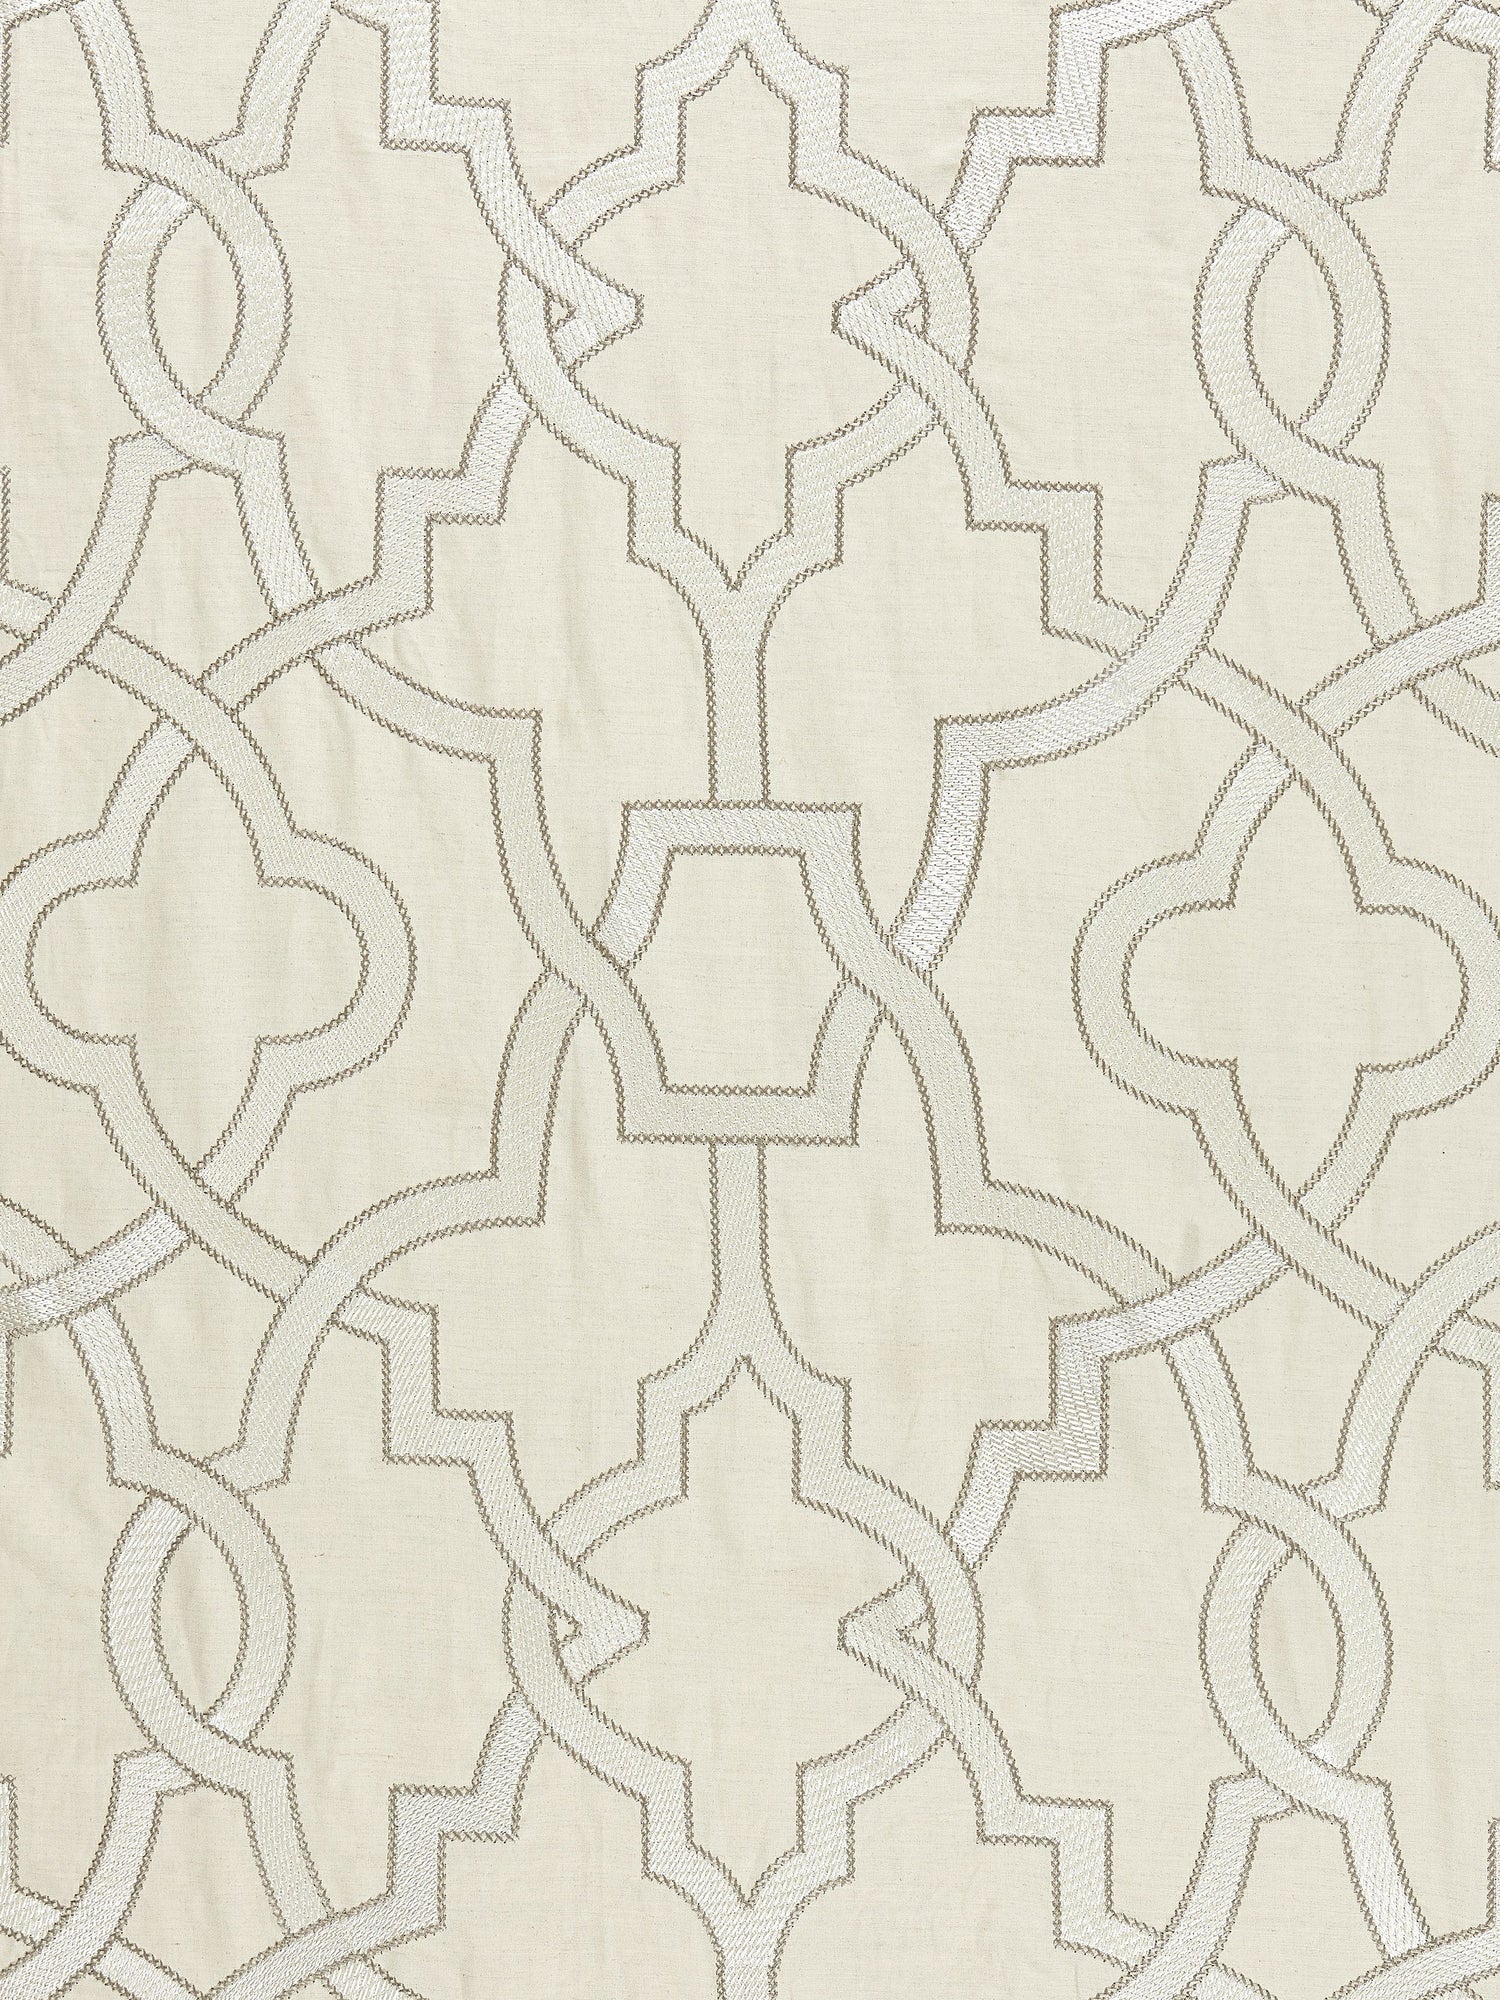 Damascus Embroidery fabric in alabaster color - pattern number SC 000127073 - by Scalamandre in the Scalamandre Fabrics Book 1 collection